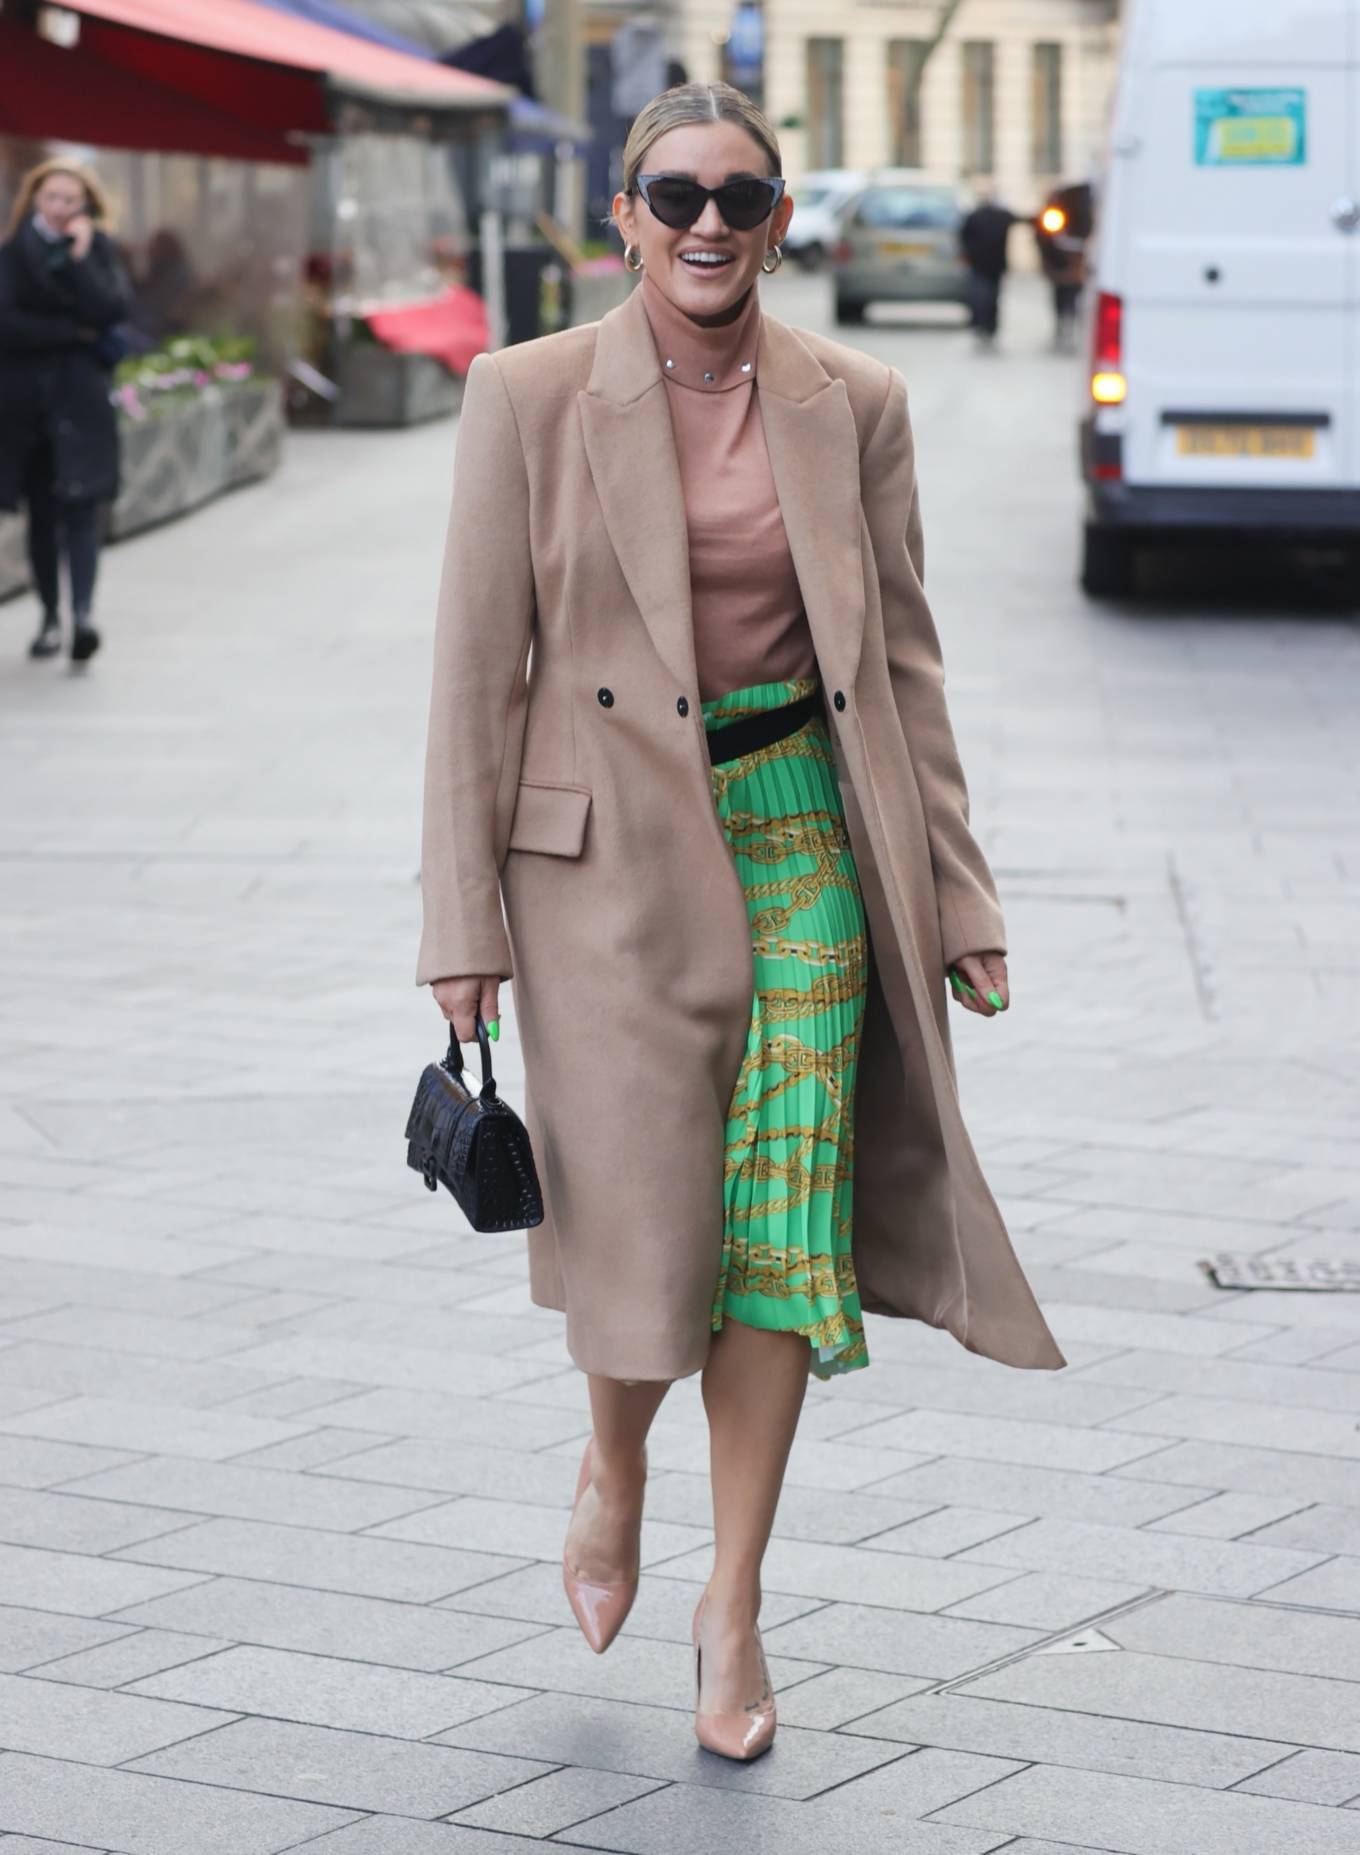 Ashley Roberts 2021 : Ashley Roberts – Wears festive green skirt stepping out from Heart radio in London-02